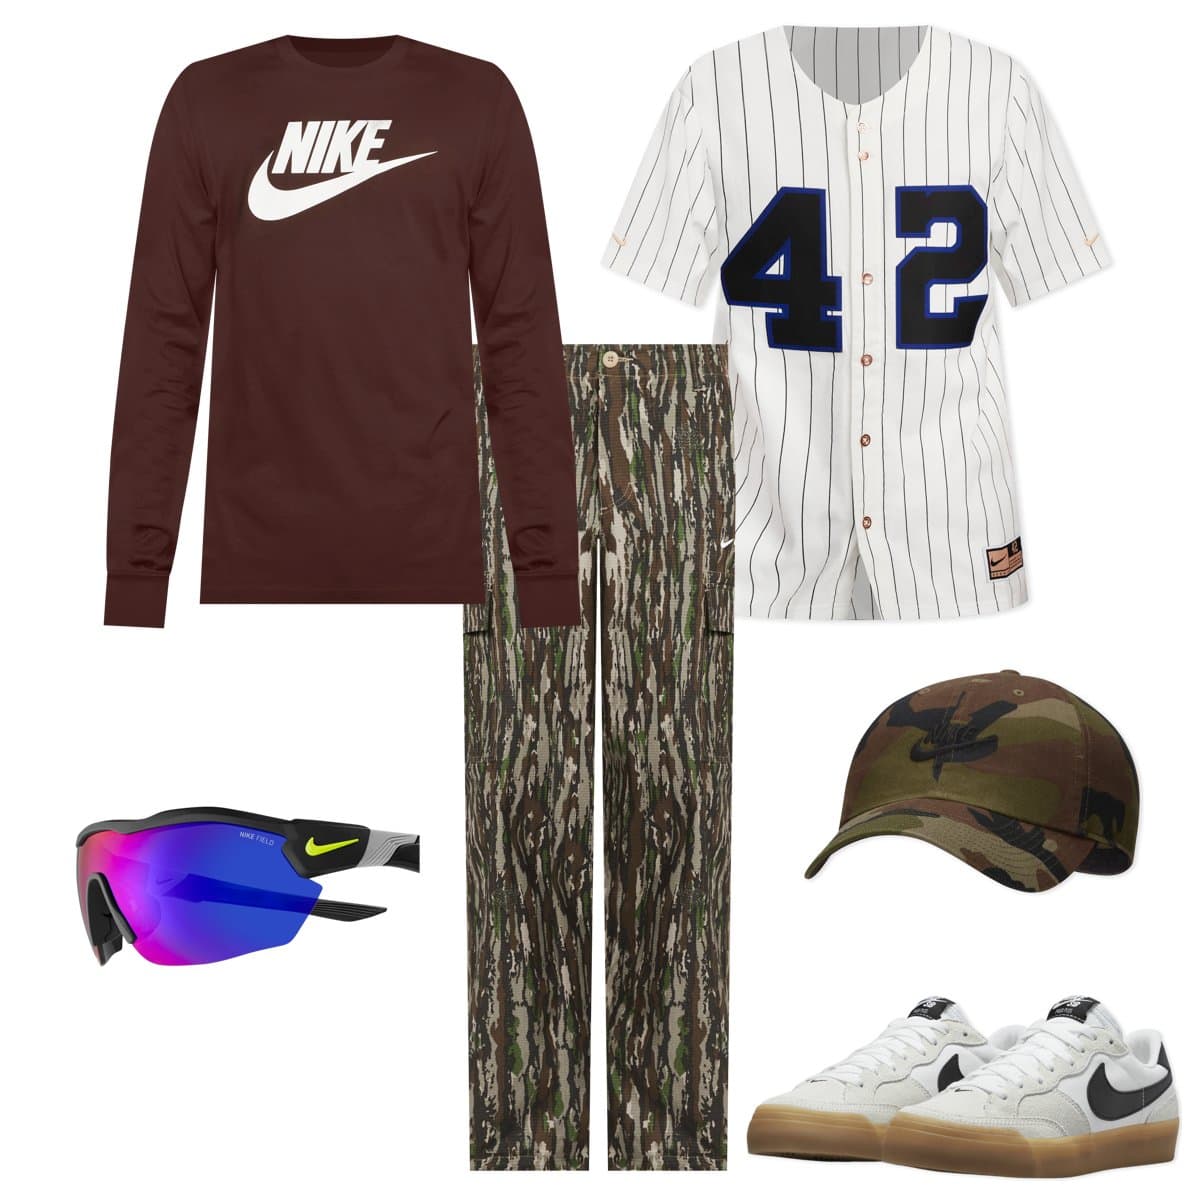 astros jersey outfit ideas